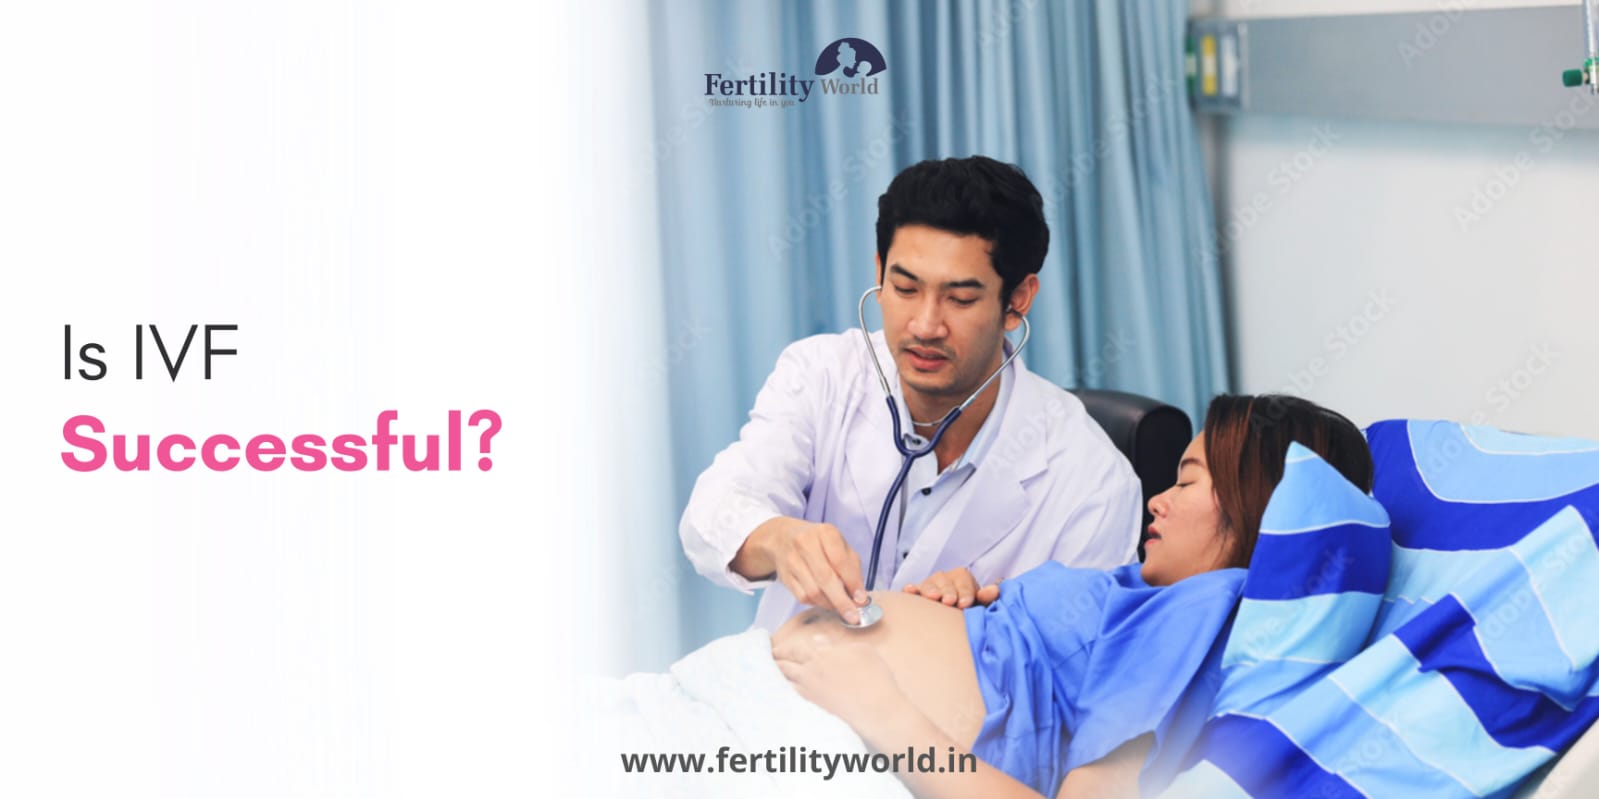 How successful is IVF in the Philippines?